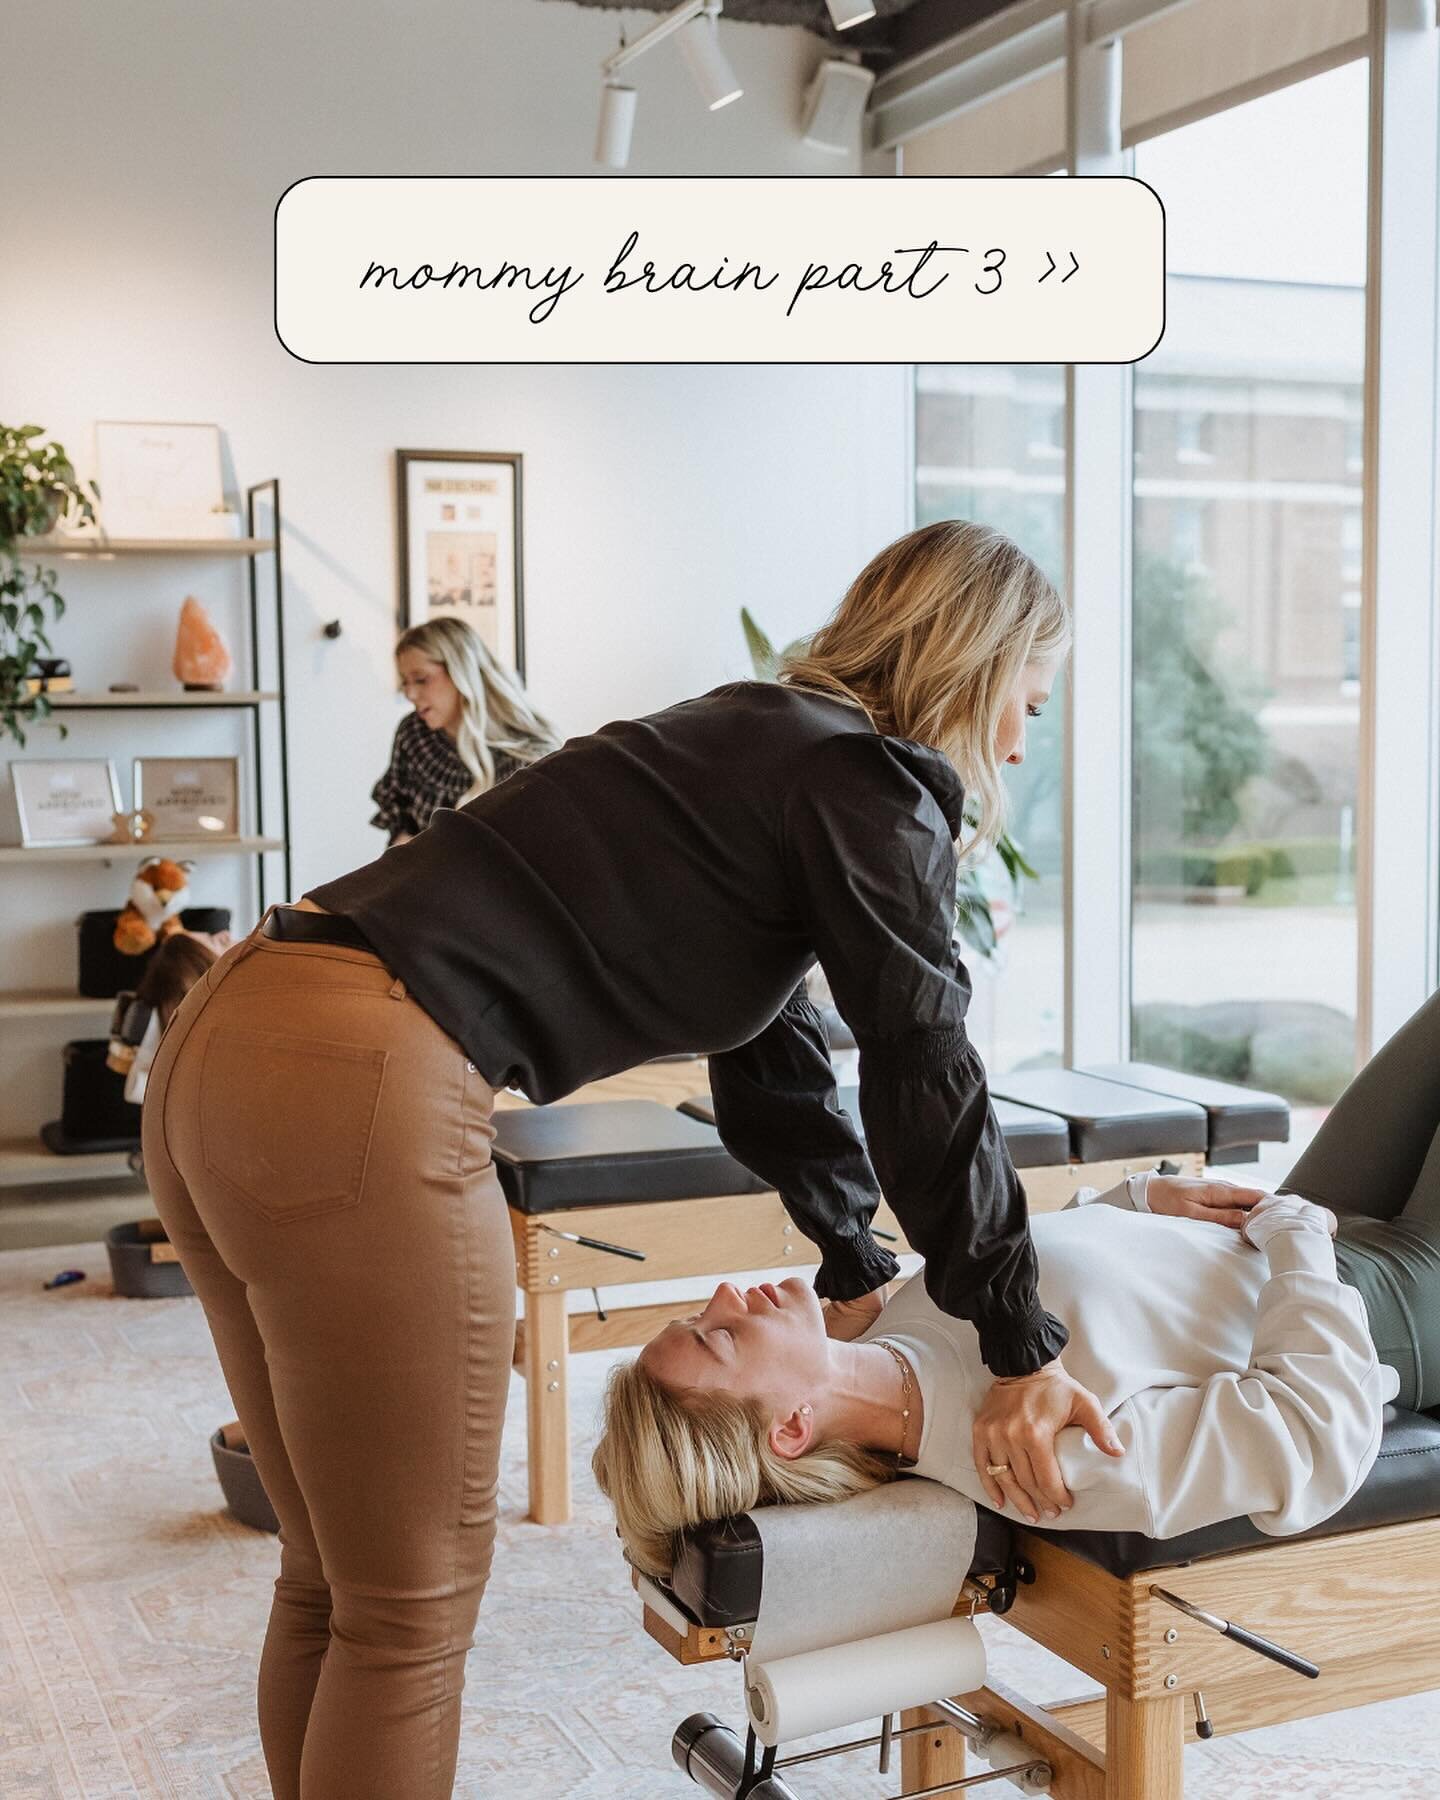 🧠 The Mommy Brain Chronicles, Part III: Did you know that changes in brain structure during pregnancy are actually beneficial?  Our brain is literally designed to change and adapt to the new challenges of motherhood:

Neuroplasticity: During pregnan